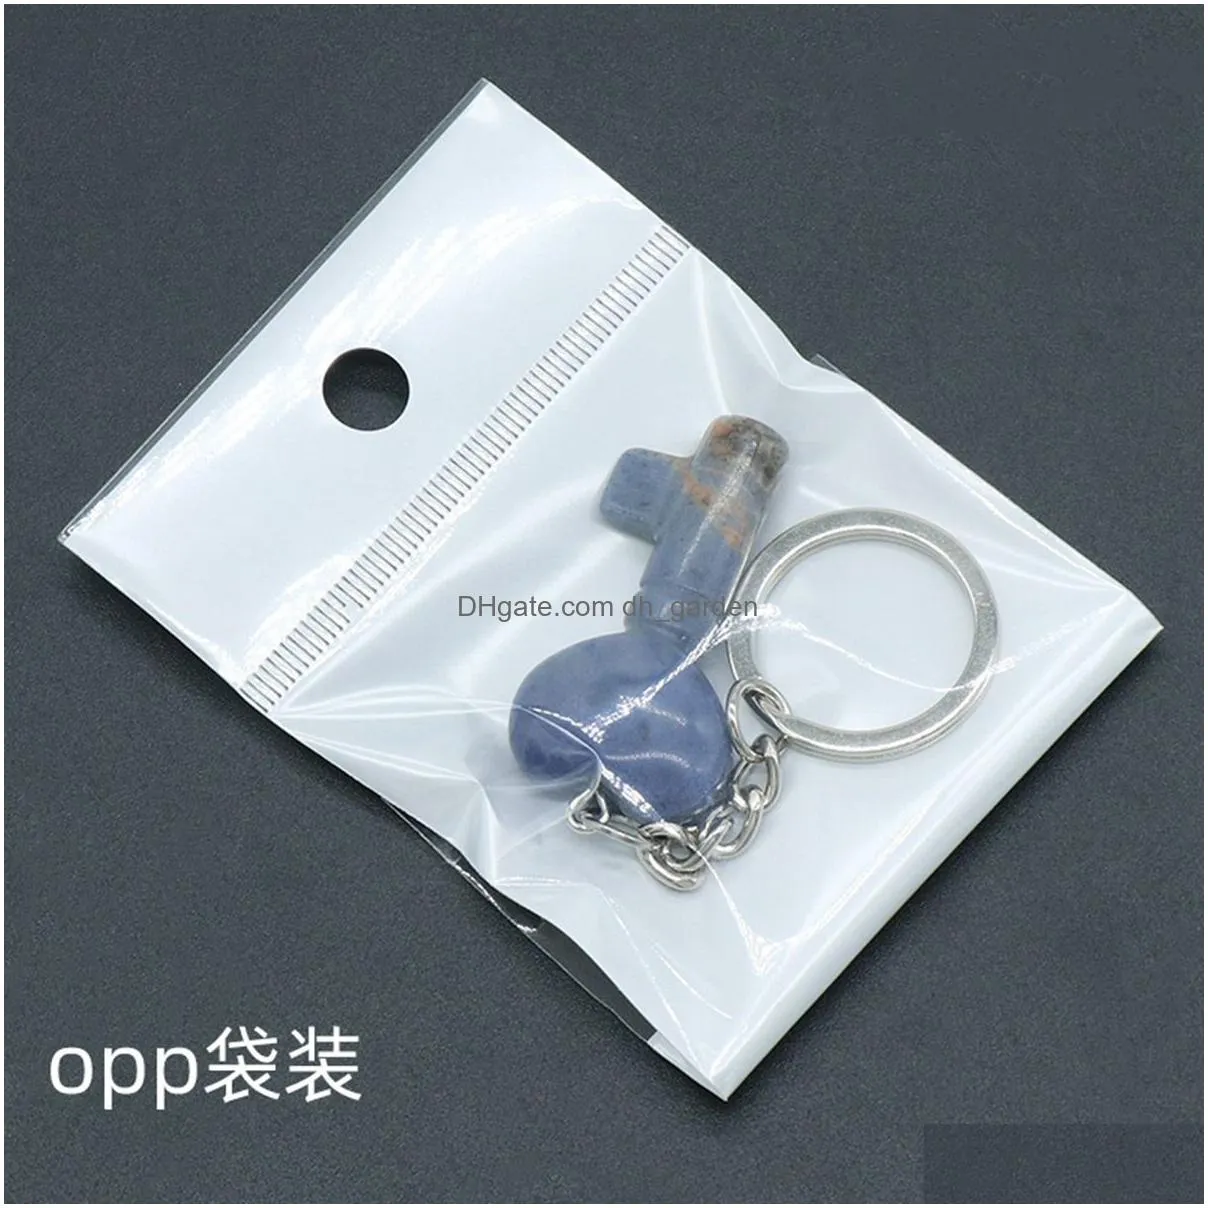 factory wholesale natural crystal gemstone heart shape key pendant healing crystal stone with alloy chain pendant keychain